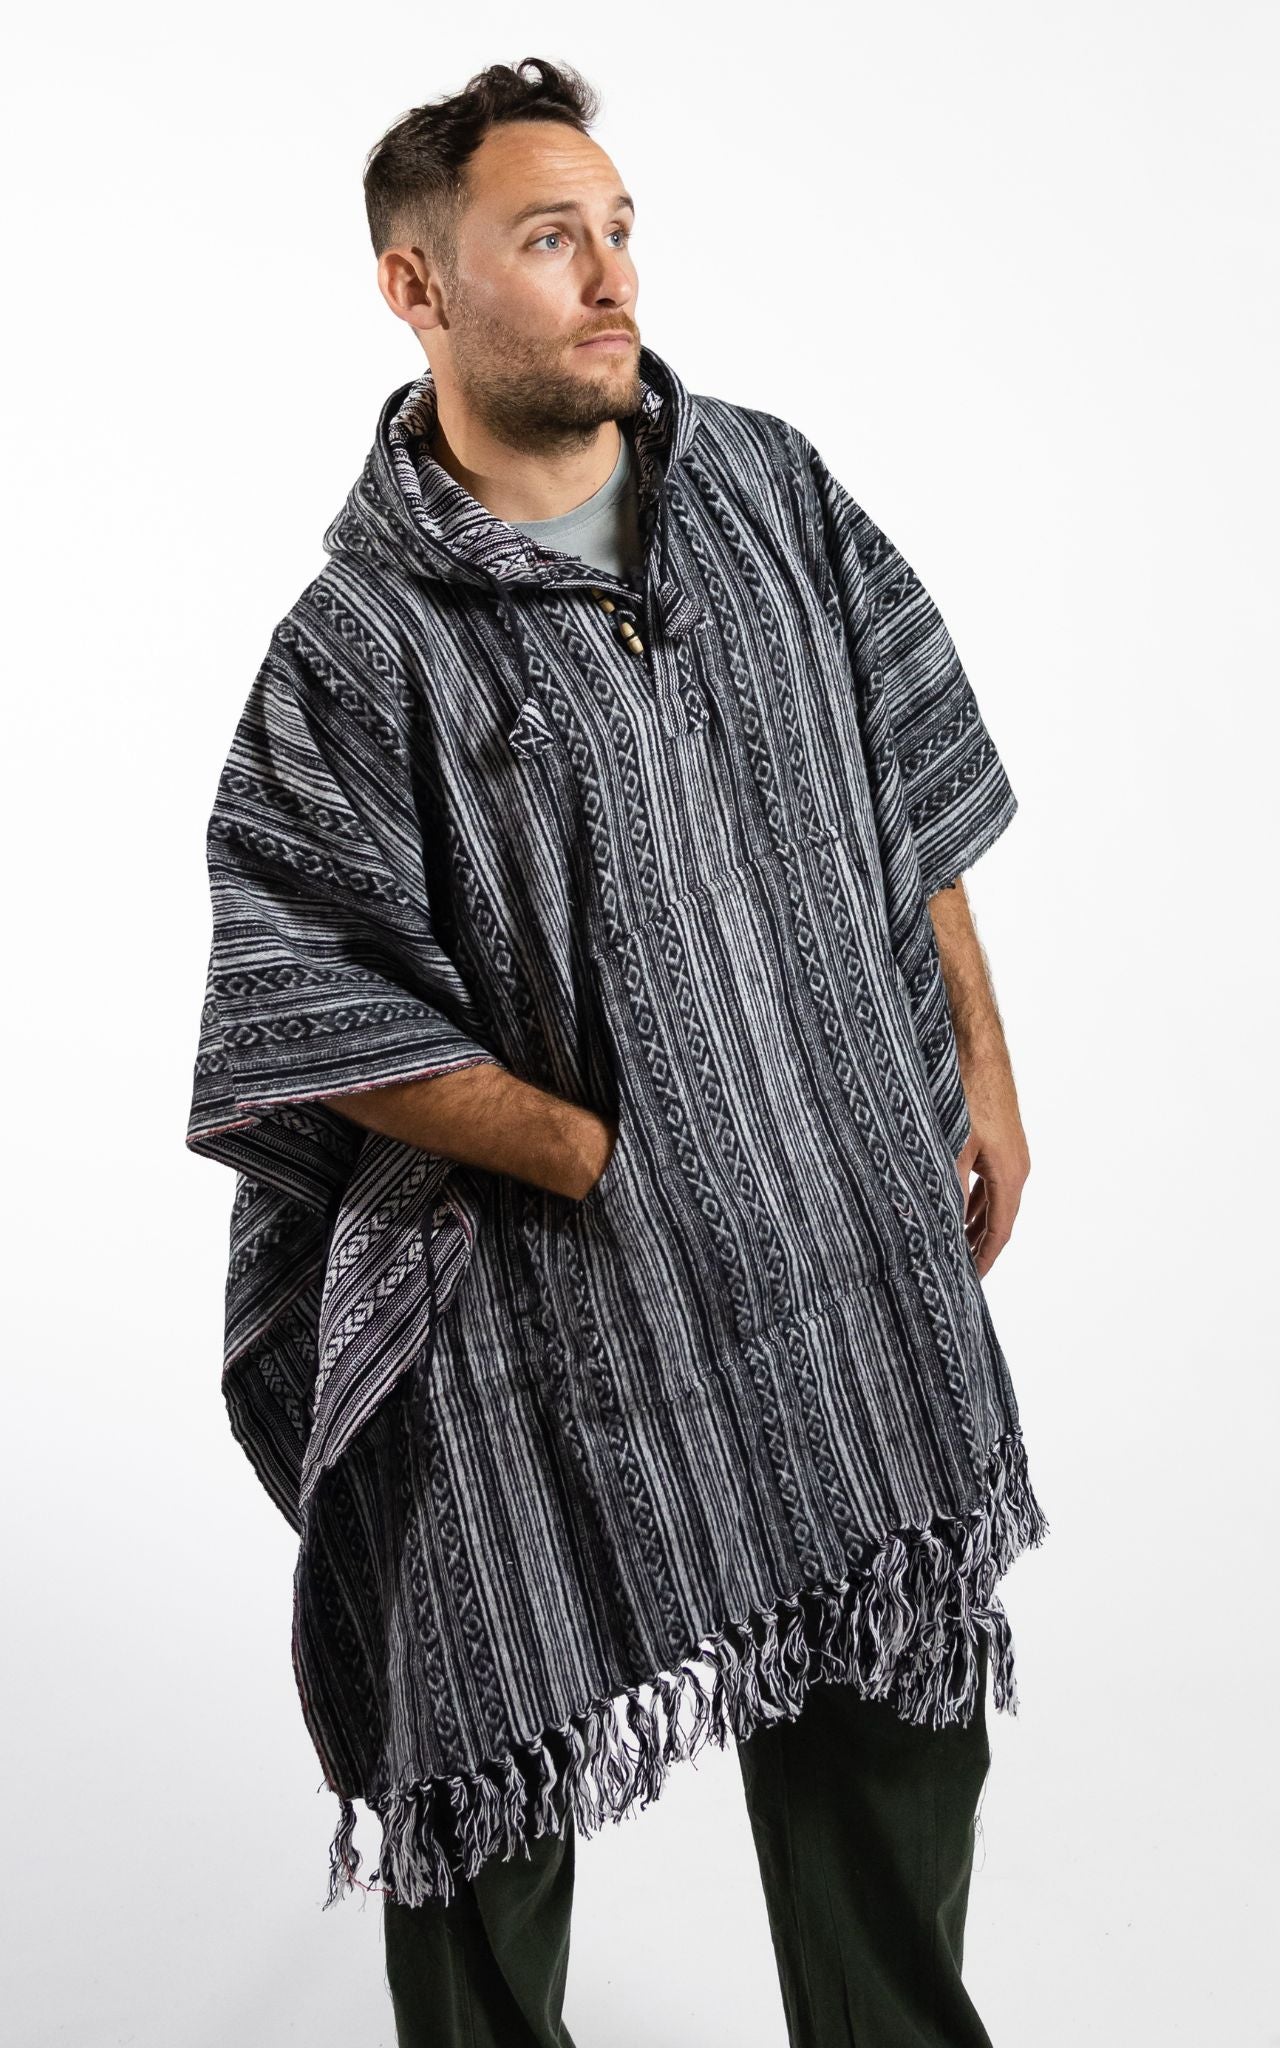 Surya Thick, Heavy Cotton Festival Poncho made in Nepal - Black